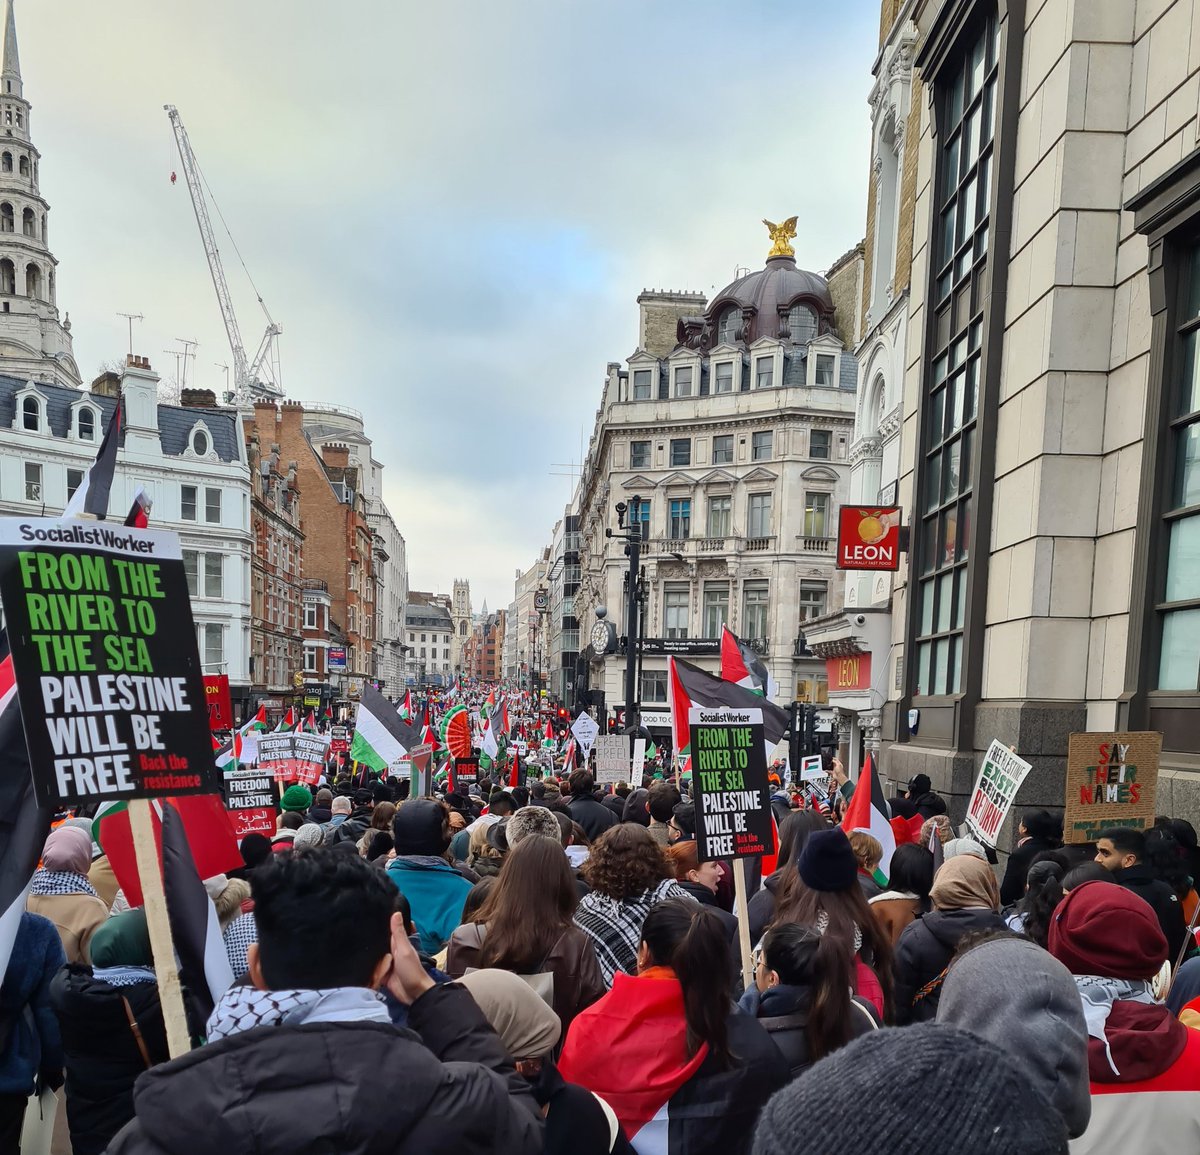 Against a backdrop of drums, helicopters and the January chill, people from all over the UK are in London to call for a free Palestine 🇵🇸 #GazaGlobalAction #CeasefireNOW #StopBombingGaza #StopBombingYemen #stopbombingpalestine